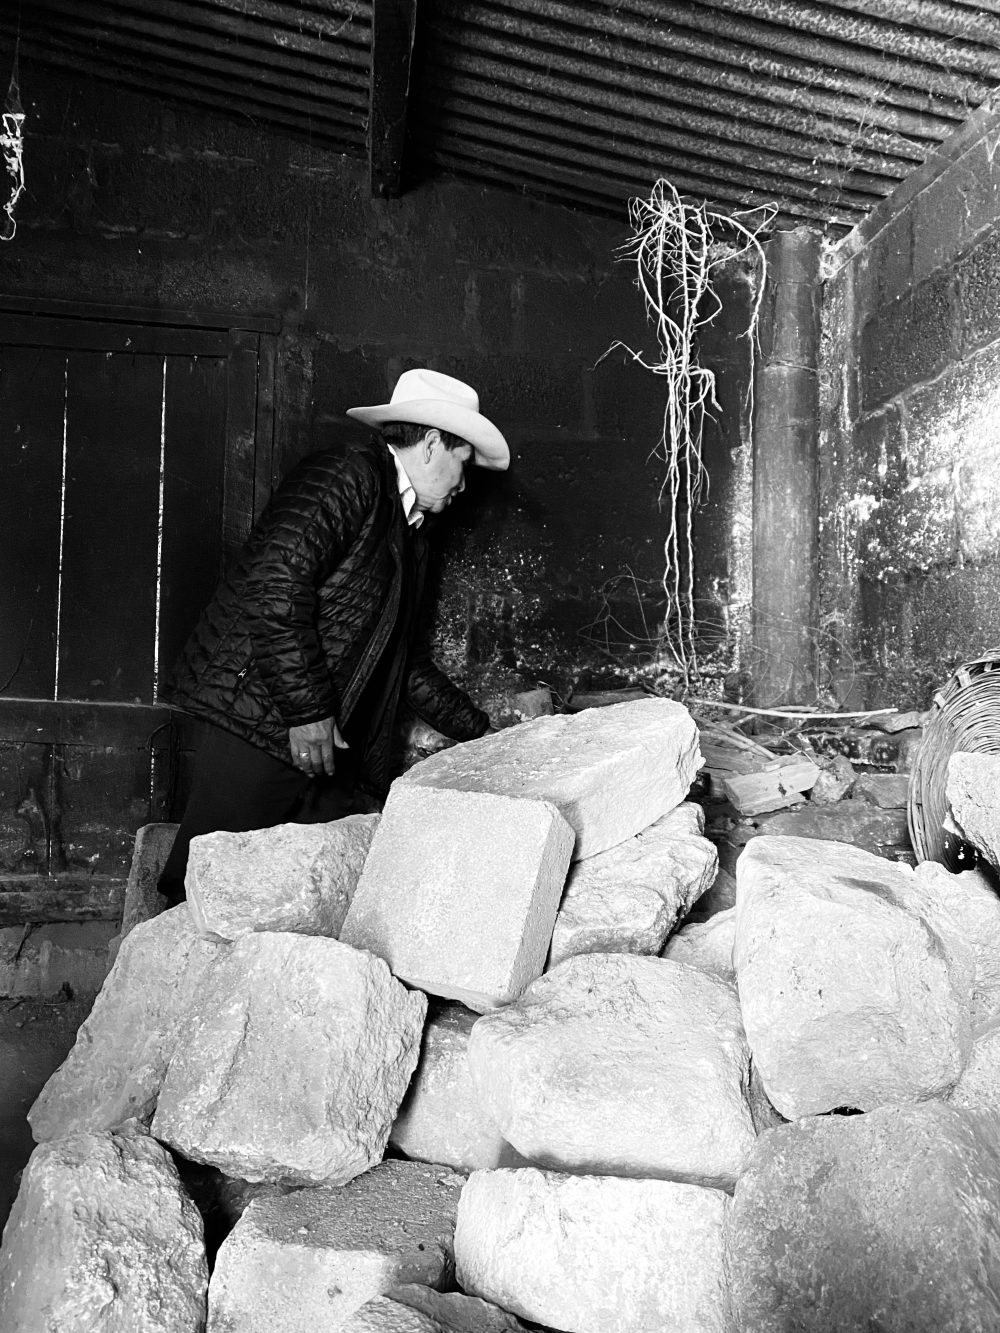 A black and white photograph with a pile of stones in the foreground and a man looking away from the camera in a black coat and white cowboy hat behind the stones.